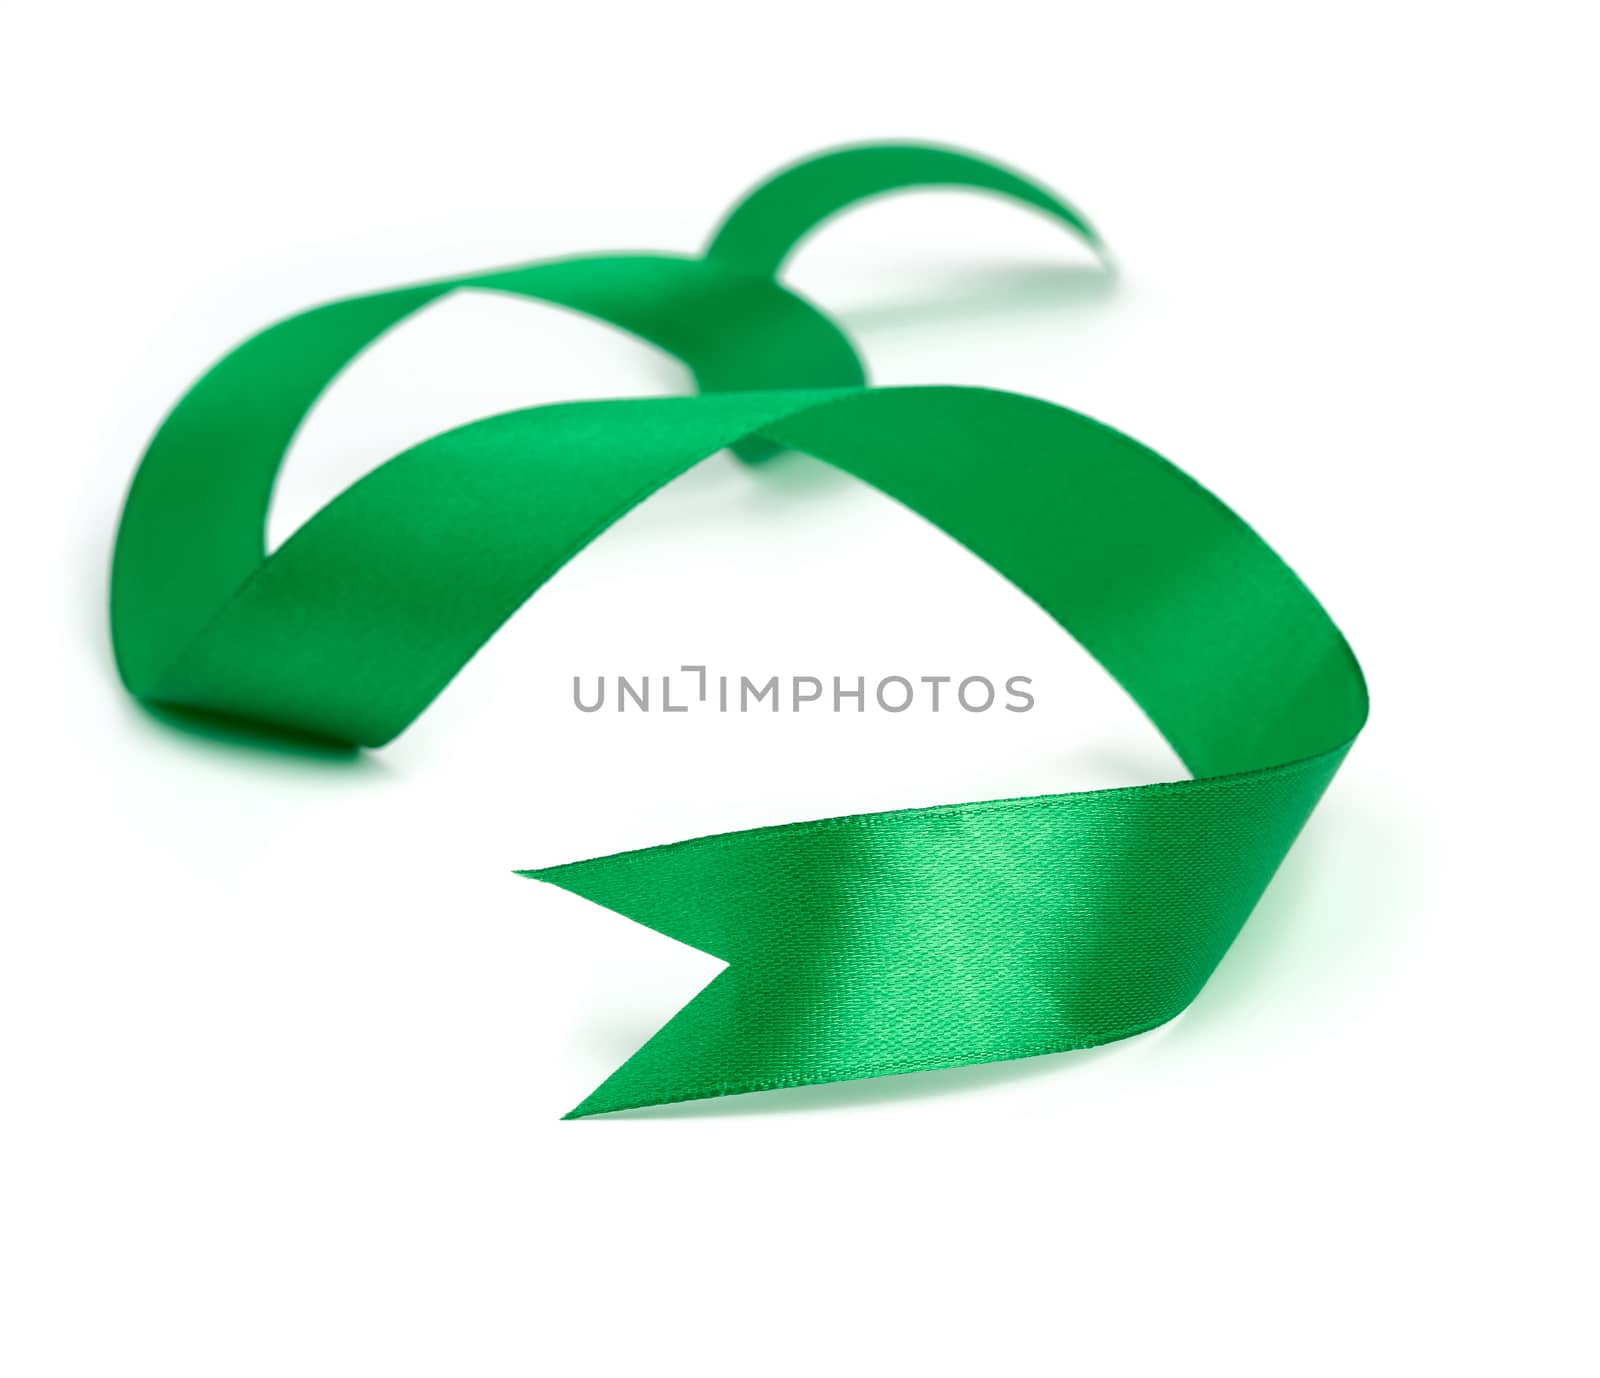 twisted green silk ribbon isolated on white background, designer element for gift decor